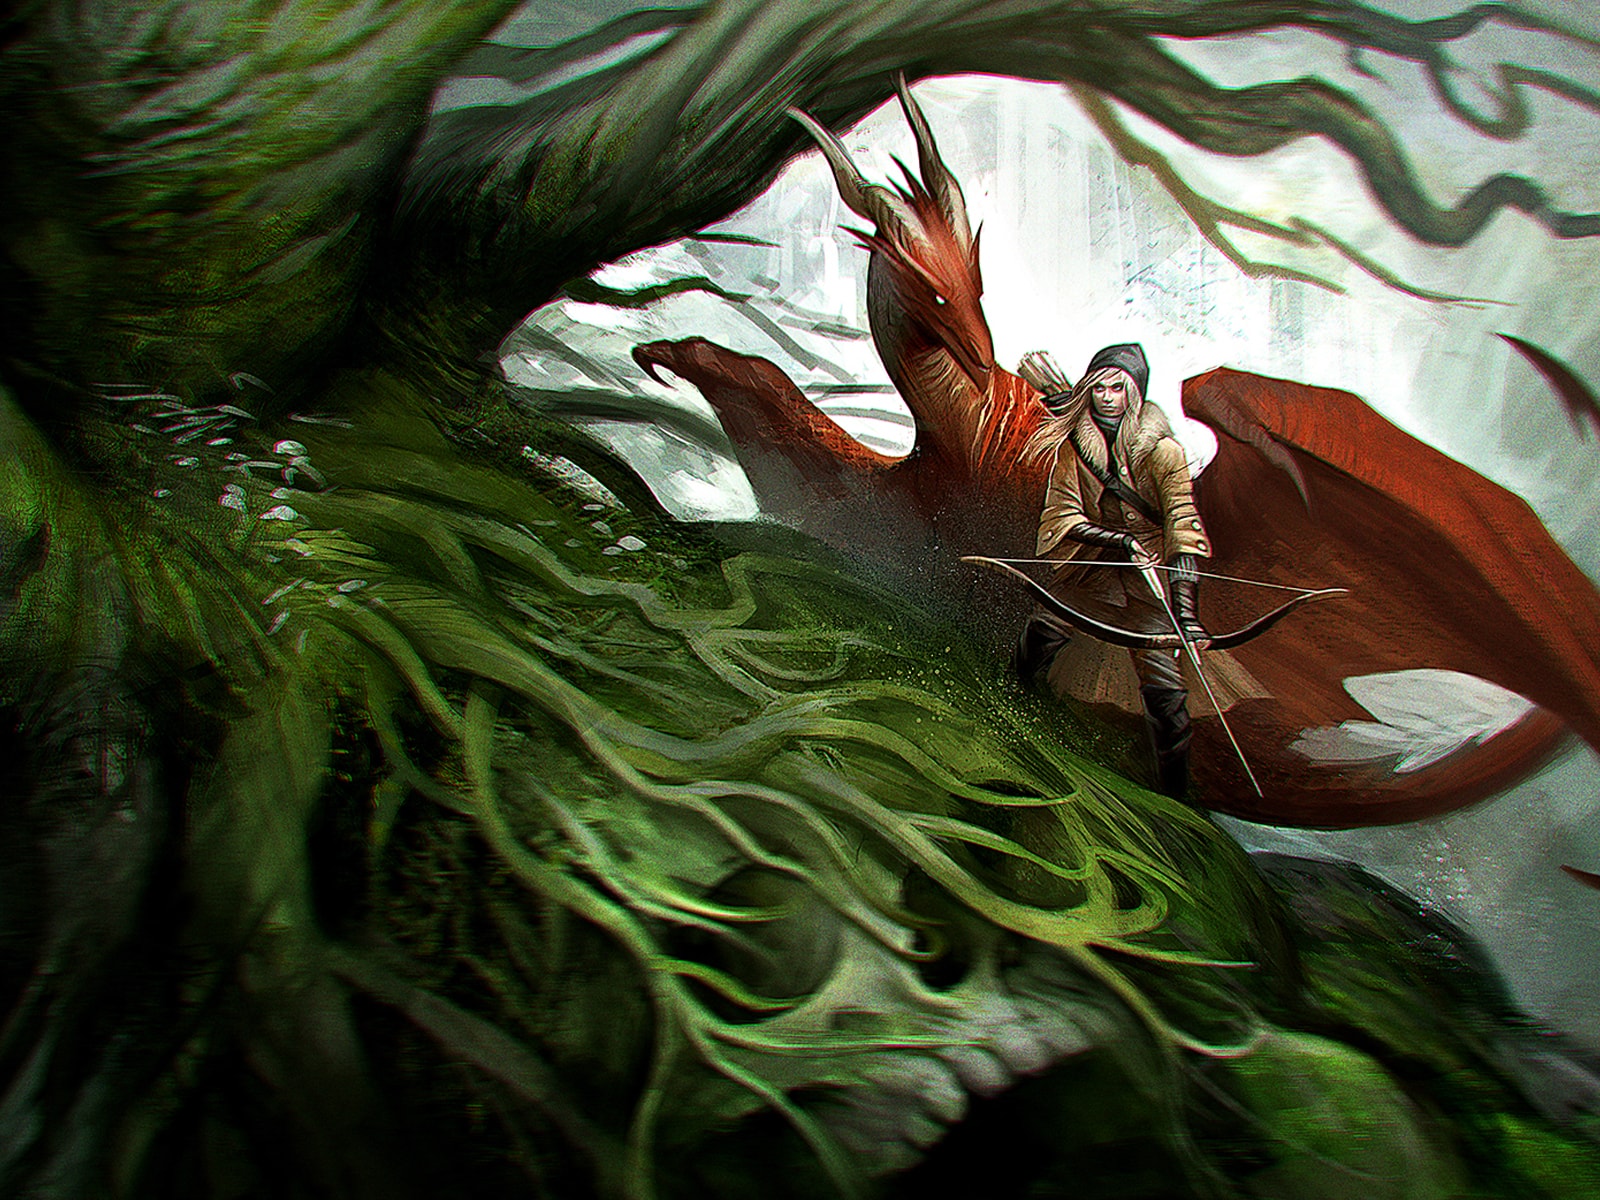 DigiPen BFA Kate Pfeilschiefter's painting of a dragon and a person with a crossbow in a tree